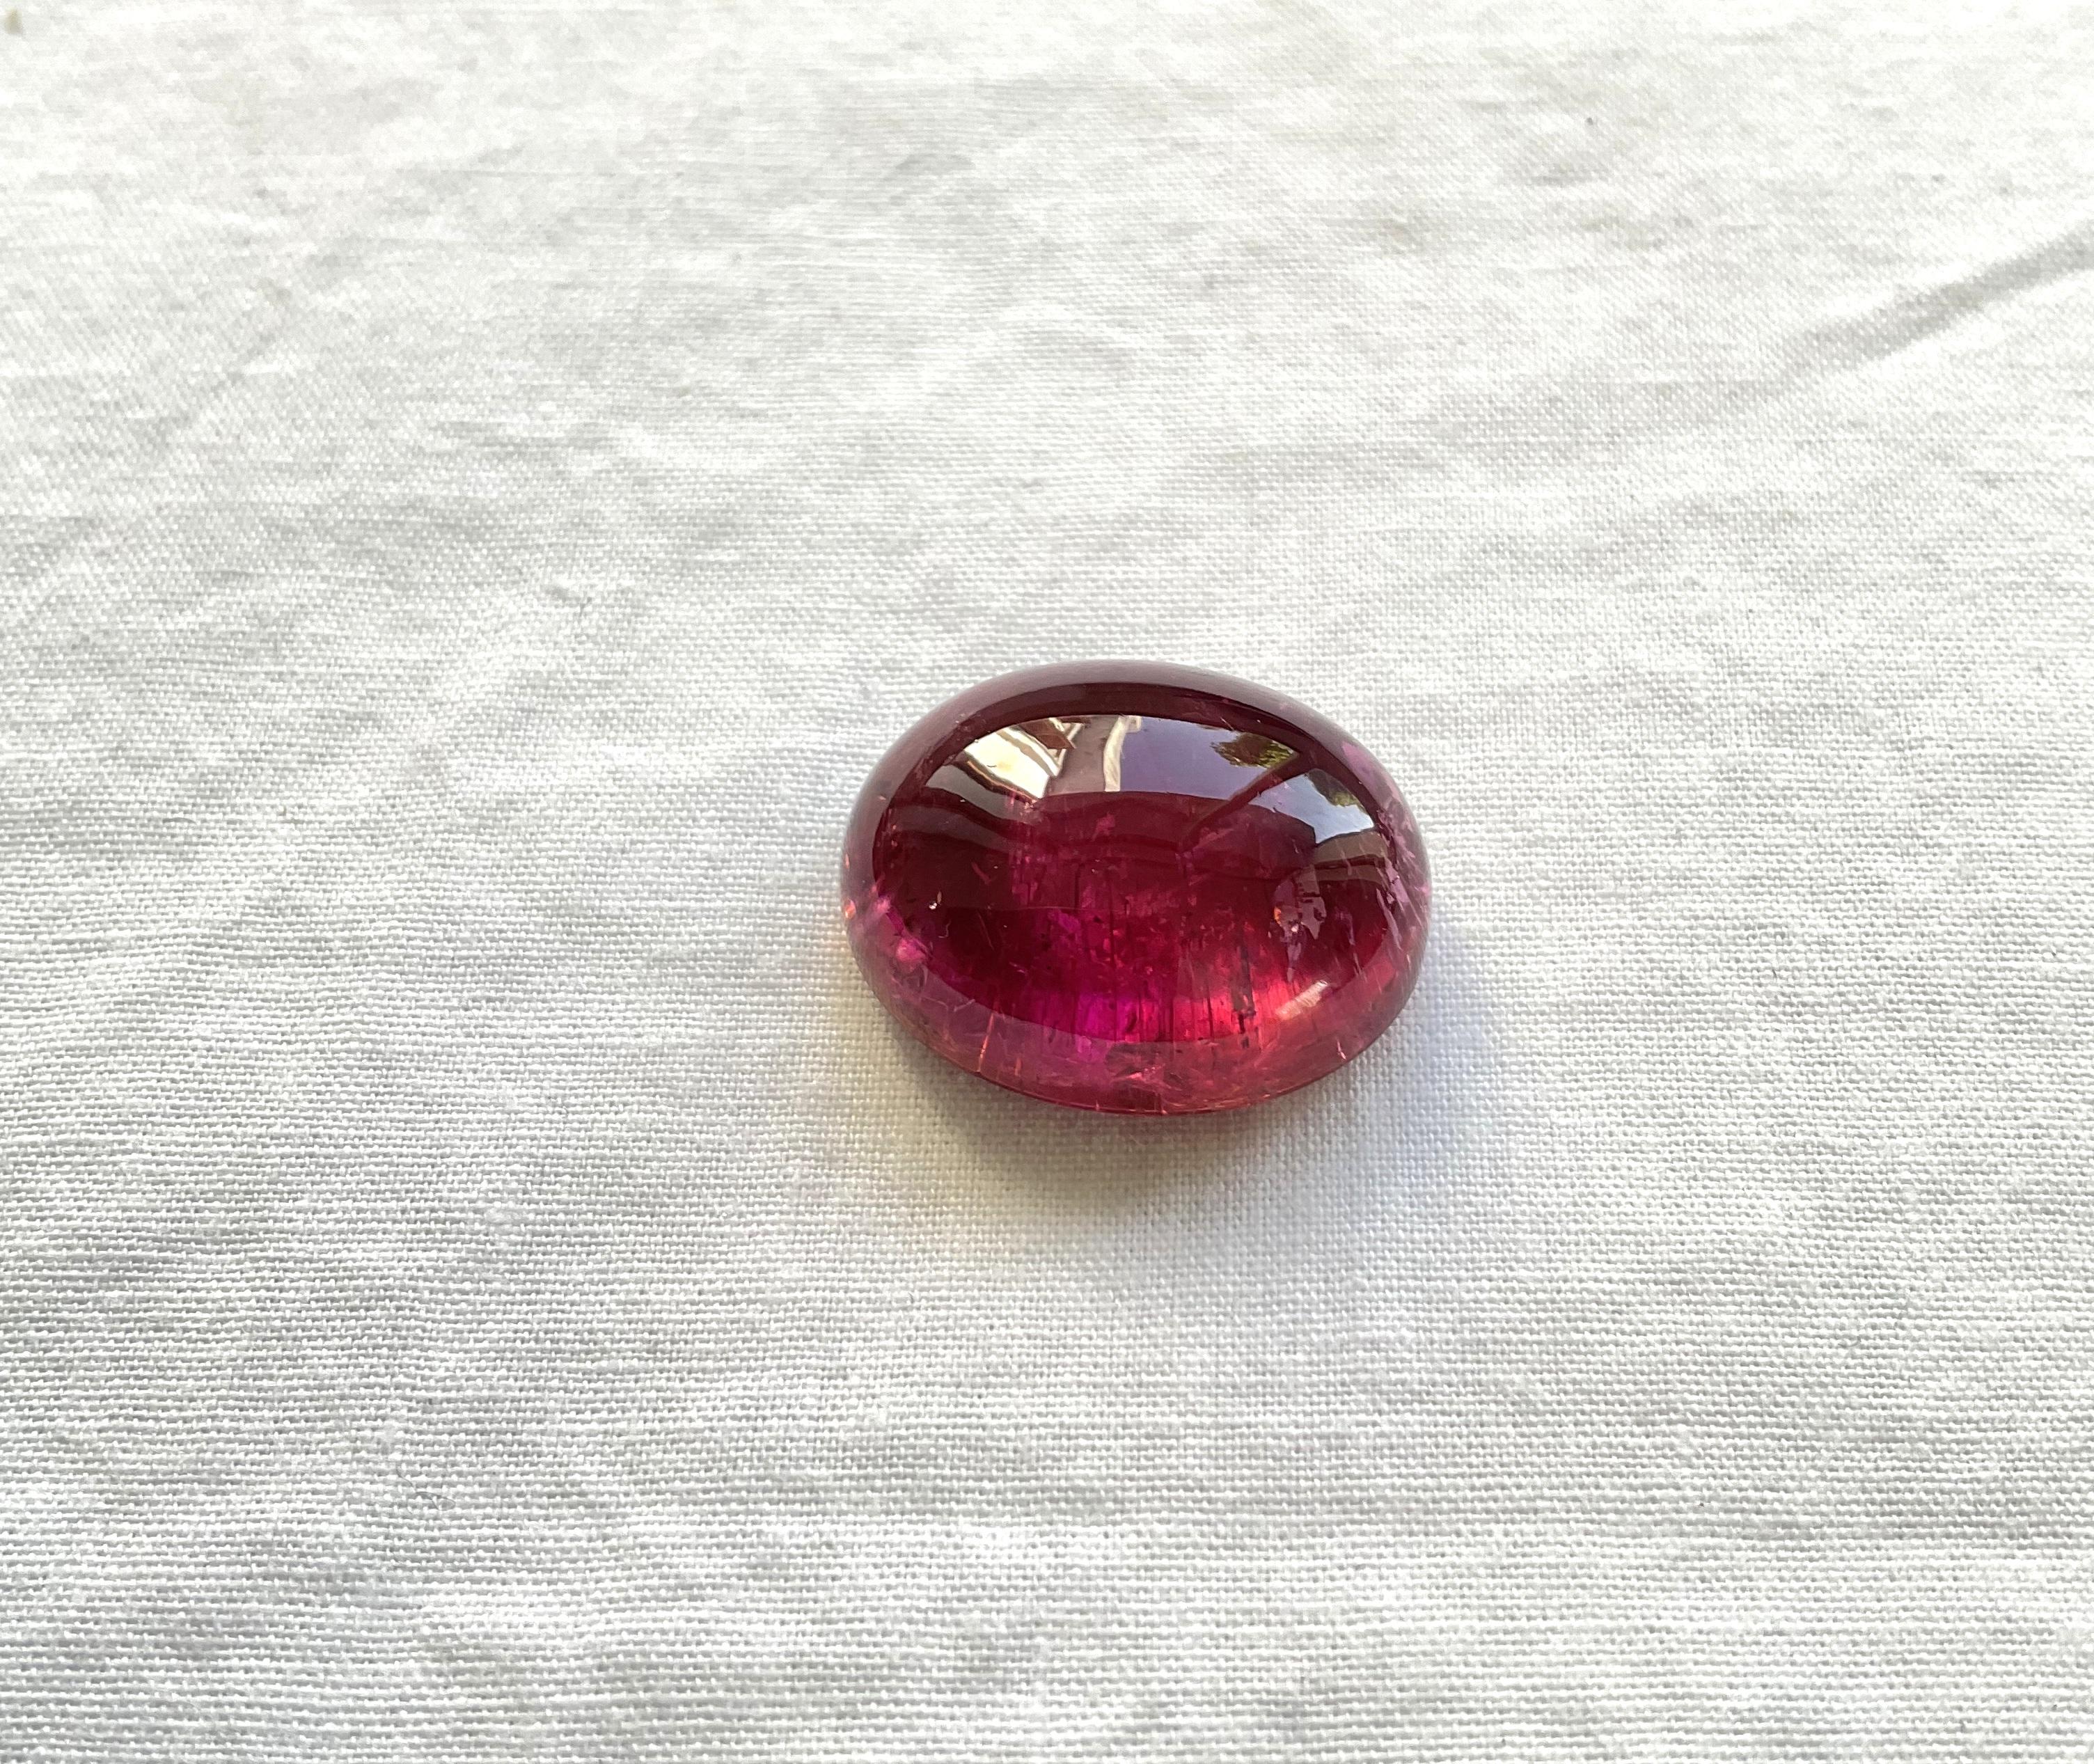 This is a one of a kind of rubellite tourmaline.
Gemstone - Rubellite Tourmaline
Weight -  24.09 Ct
Size - 20x16.6 MM
Piece - 1

